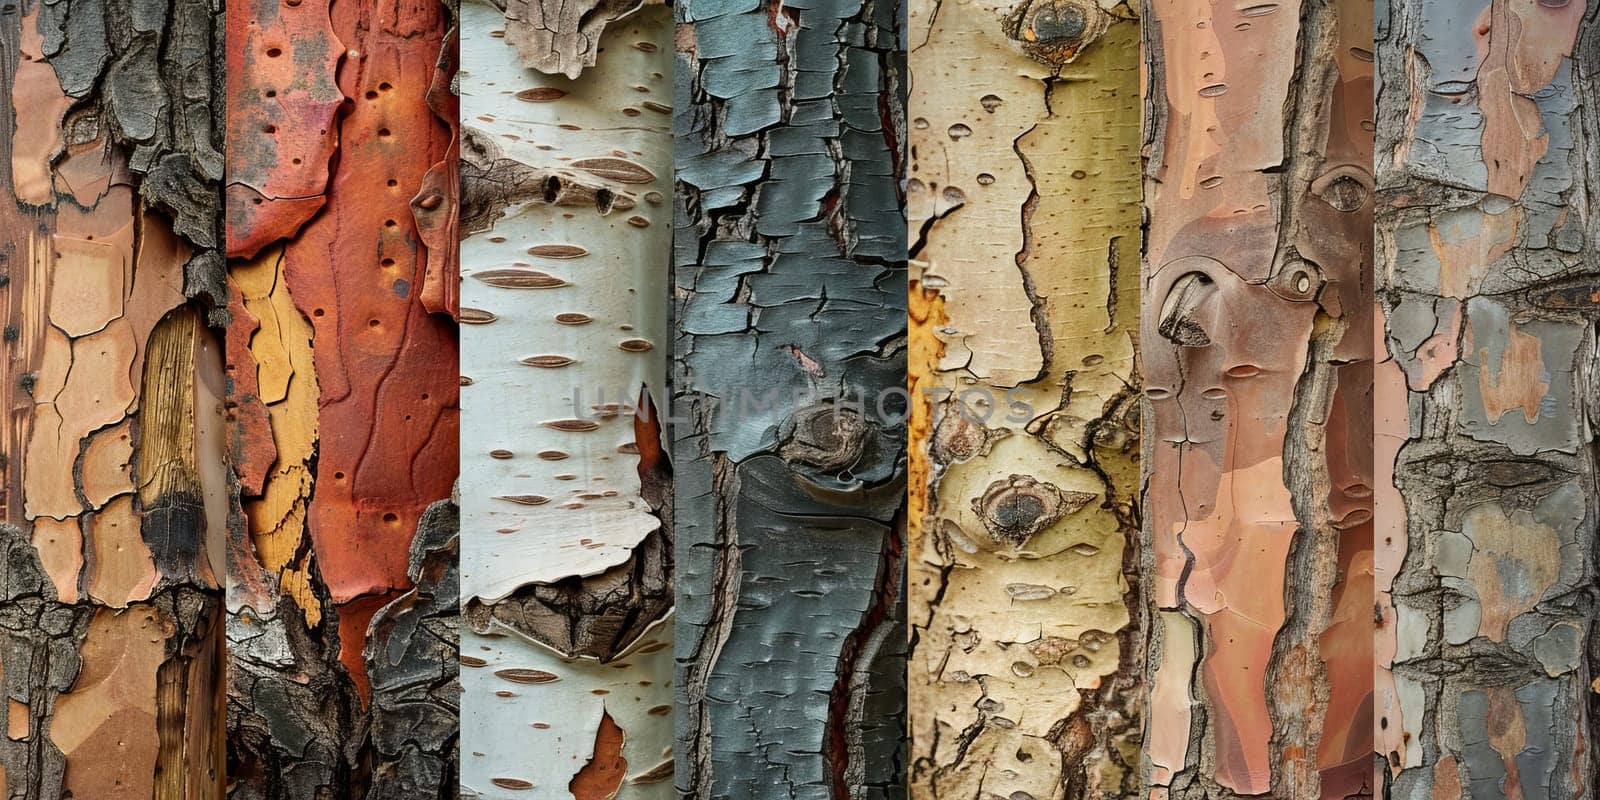 Different kinds of tree barks intricate details and natural artistry of bark formations